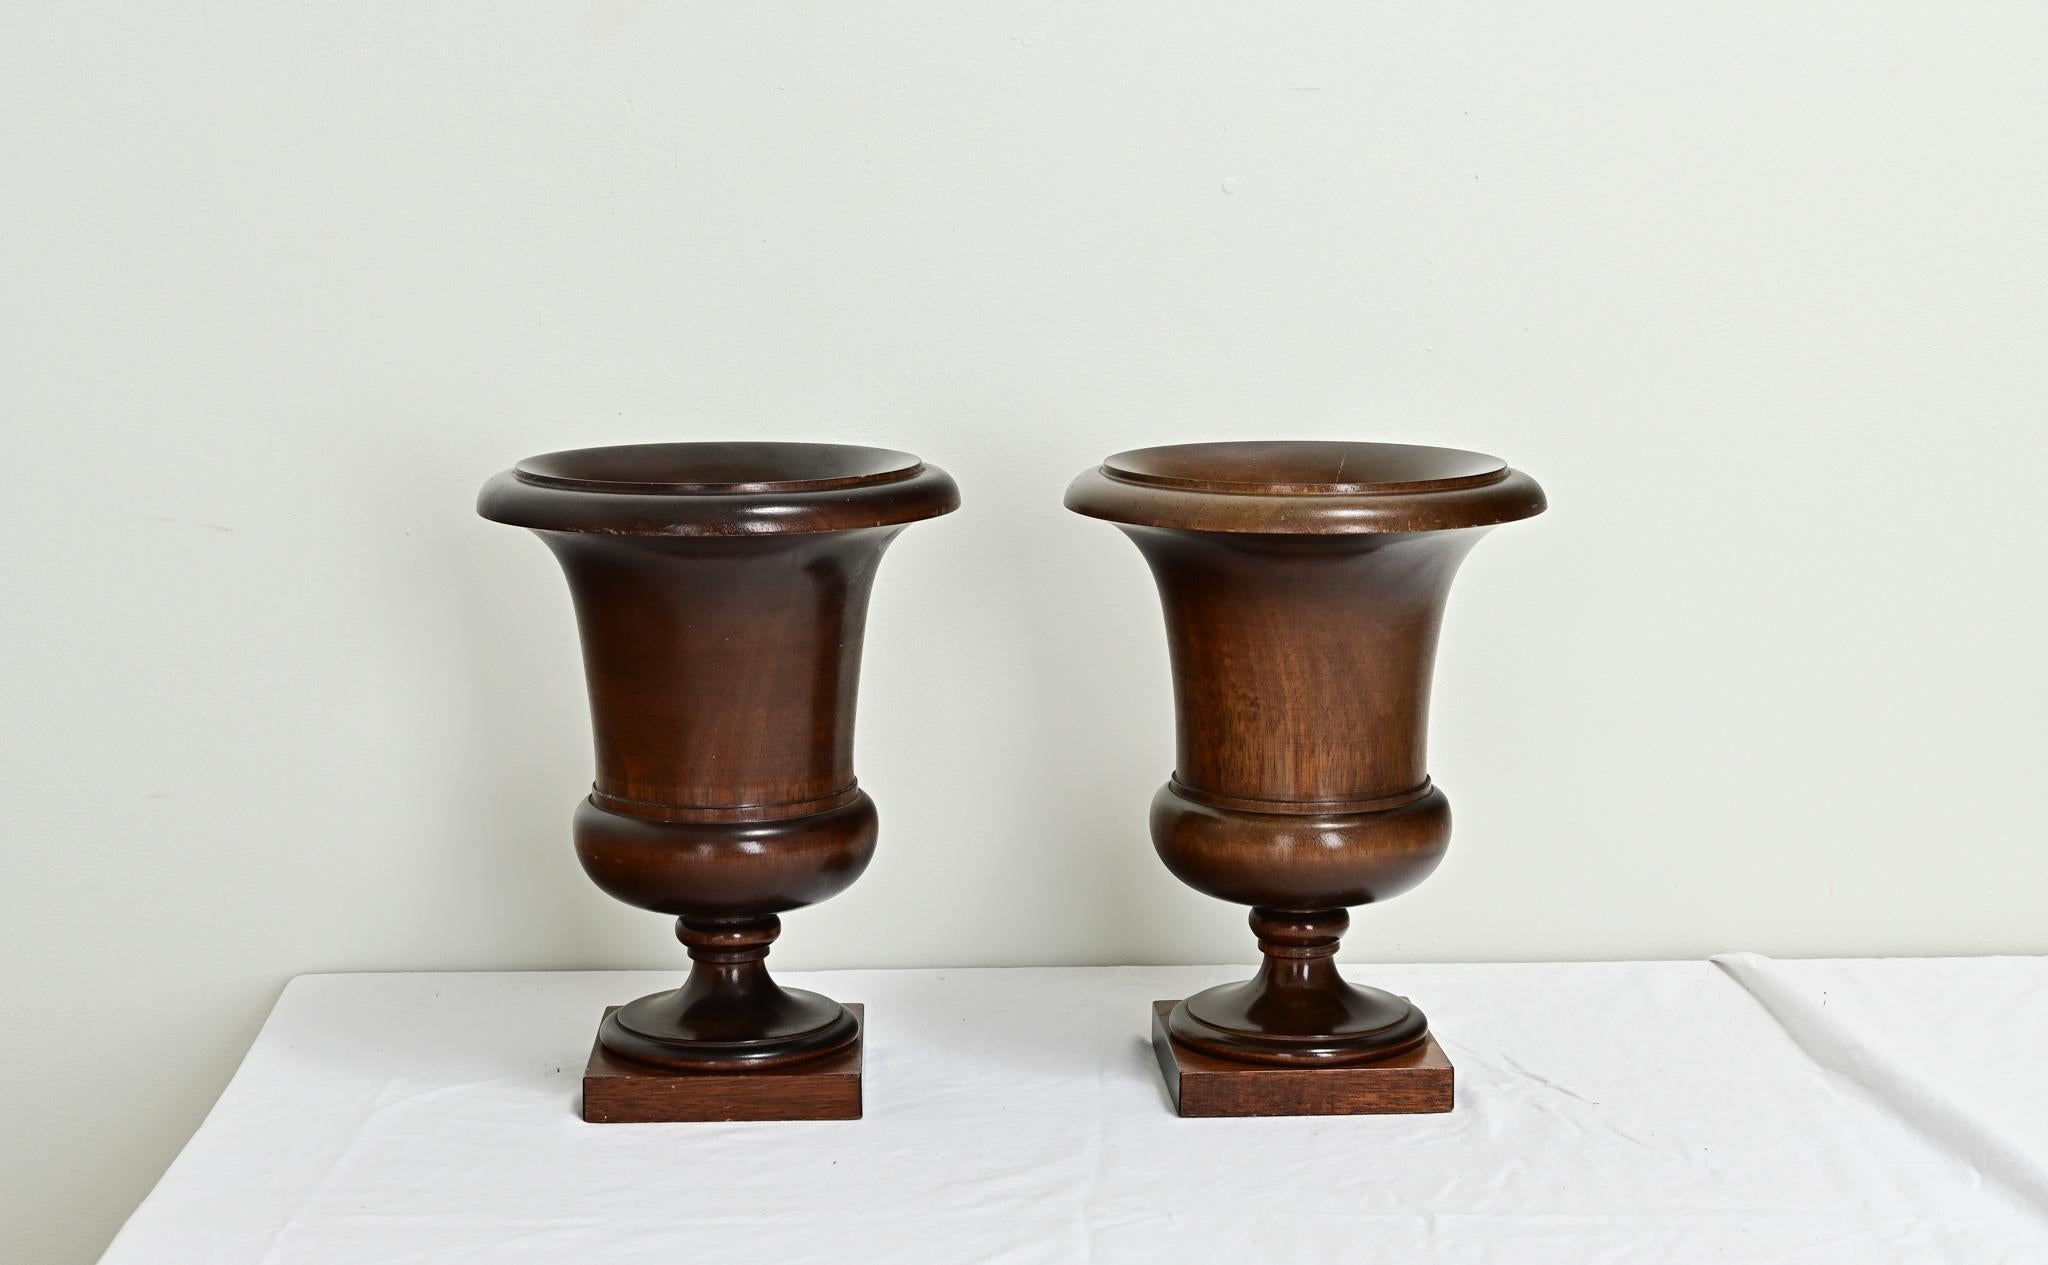 Hand-Crafted English Pair of 19th Century Walnut Urns For Sale